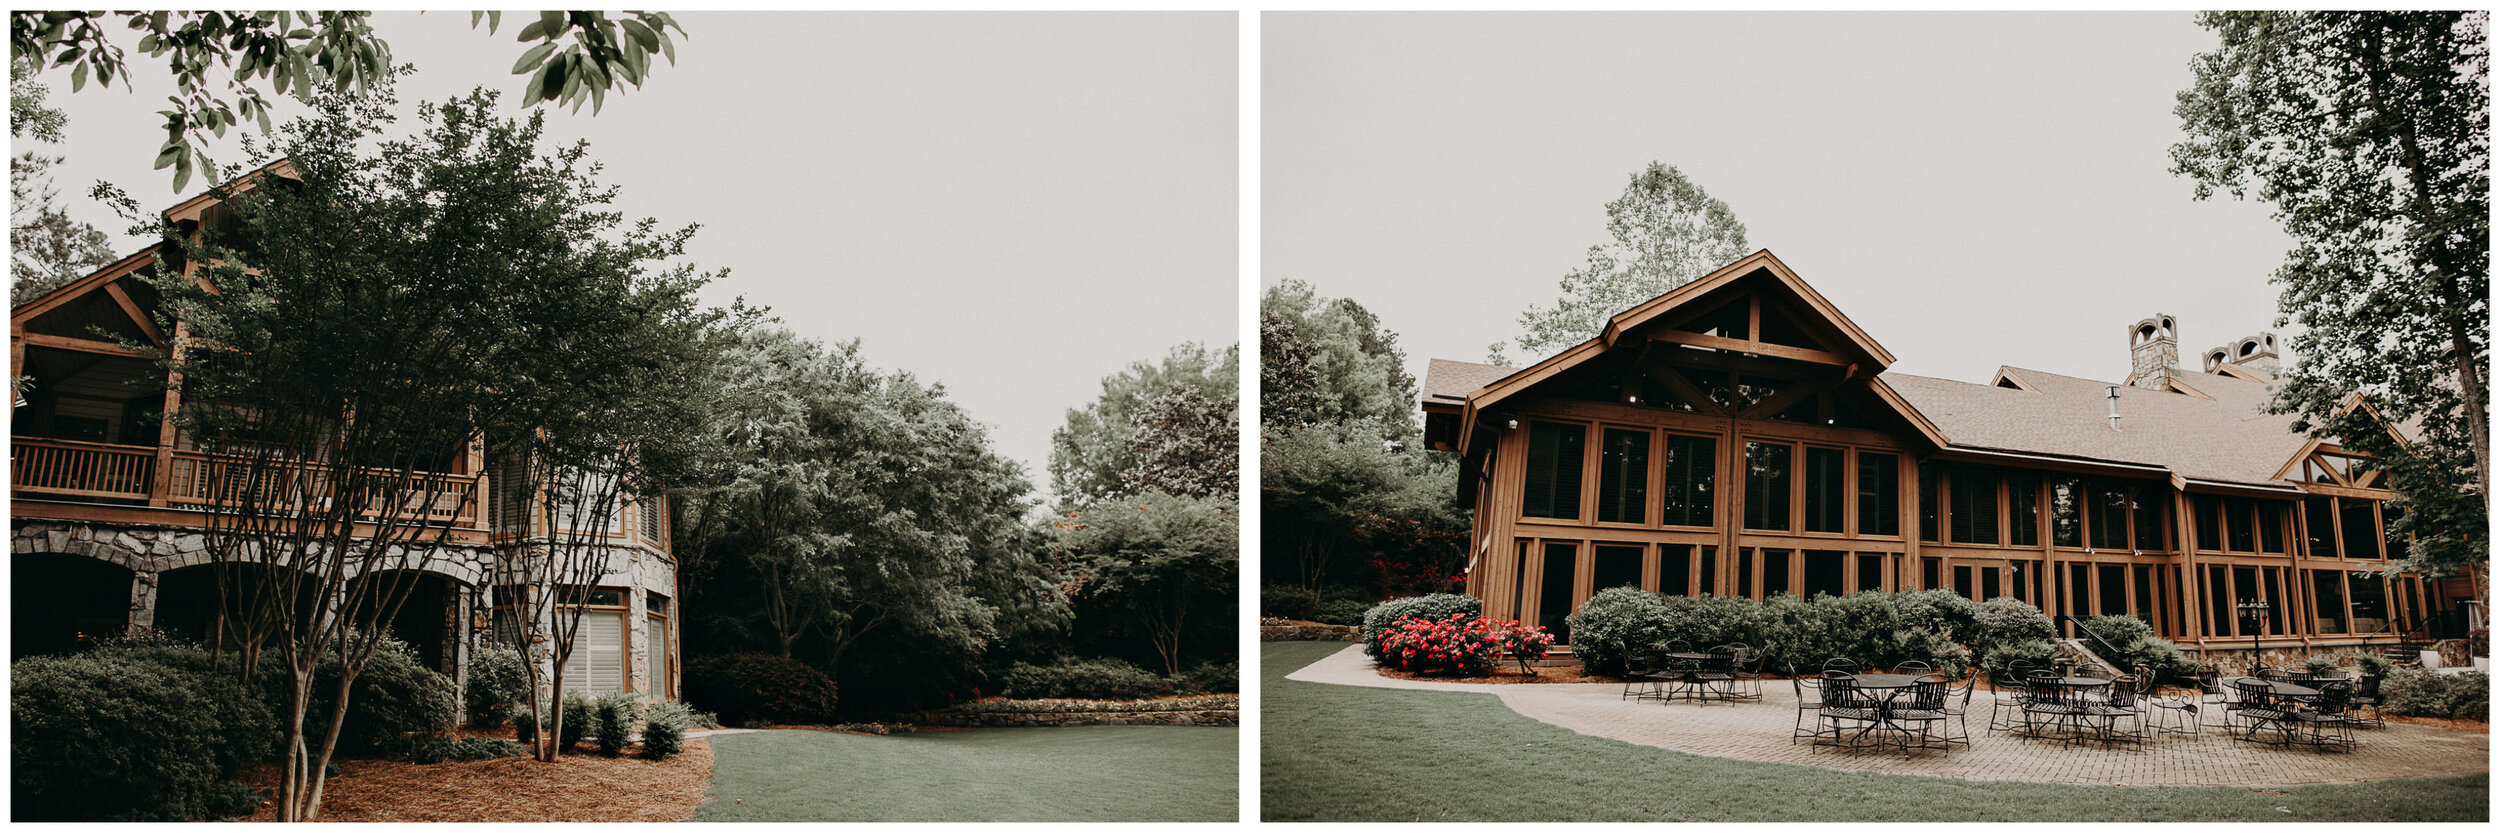 Christa & Ben's Wedding Day || Atlanta Spring Wedding at The Country Club of The South1.jpg